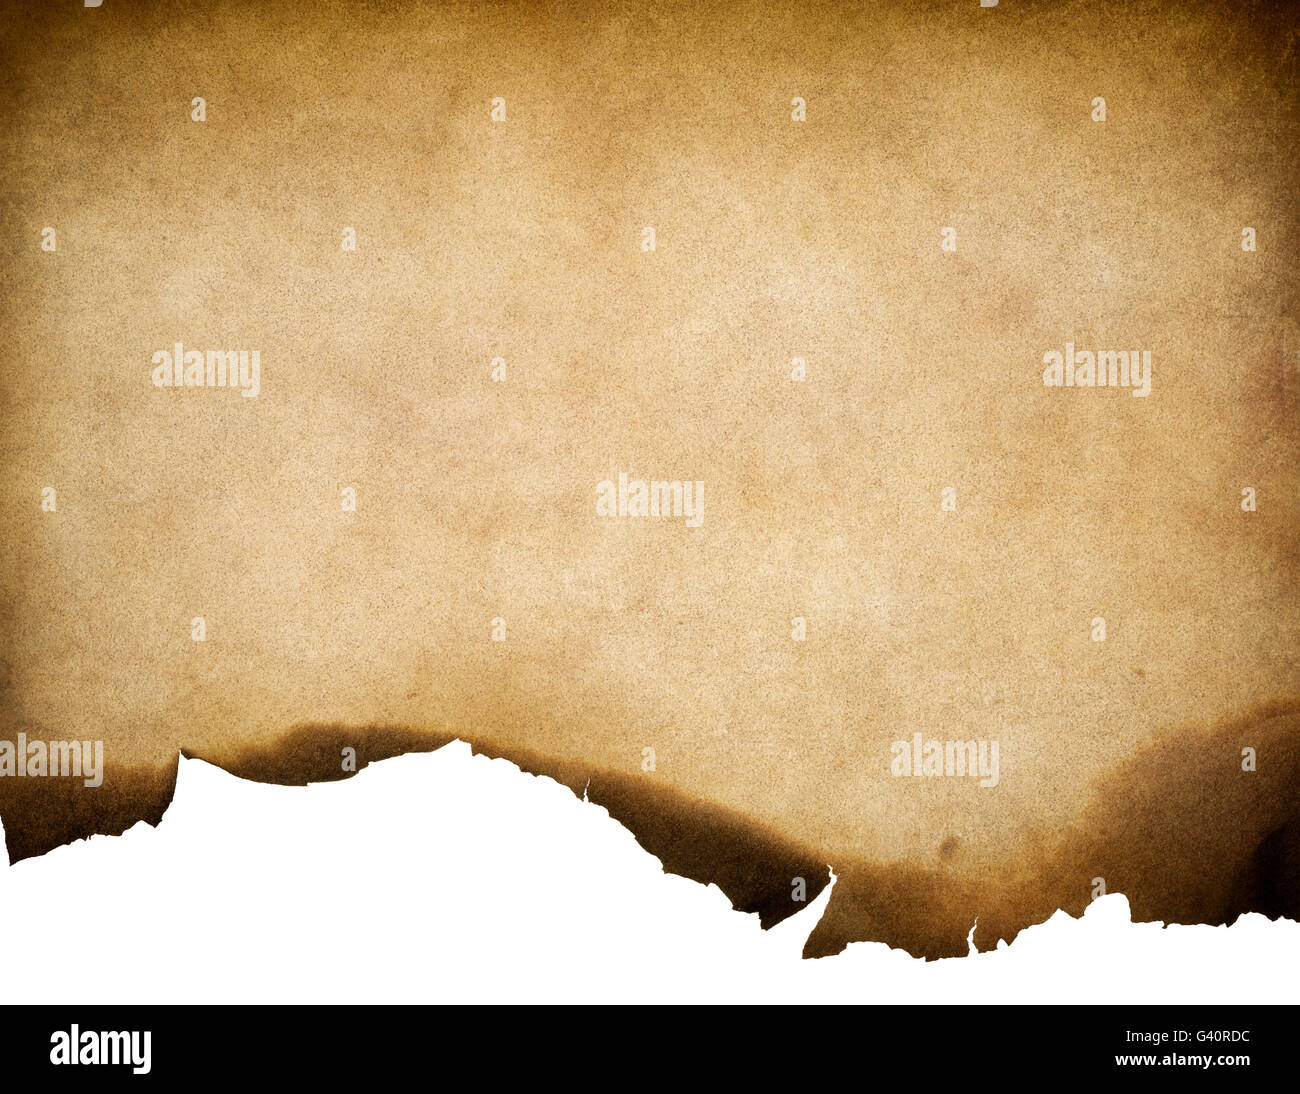 Old paper background. Yellow aged paper Stock Photo - Alamy